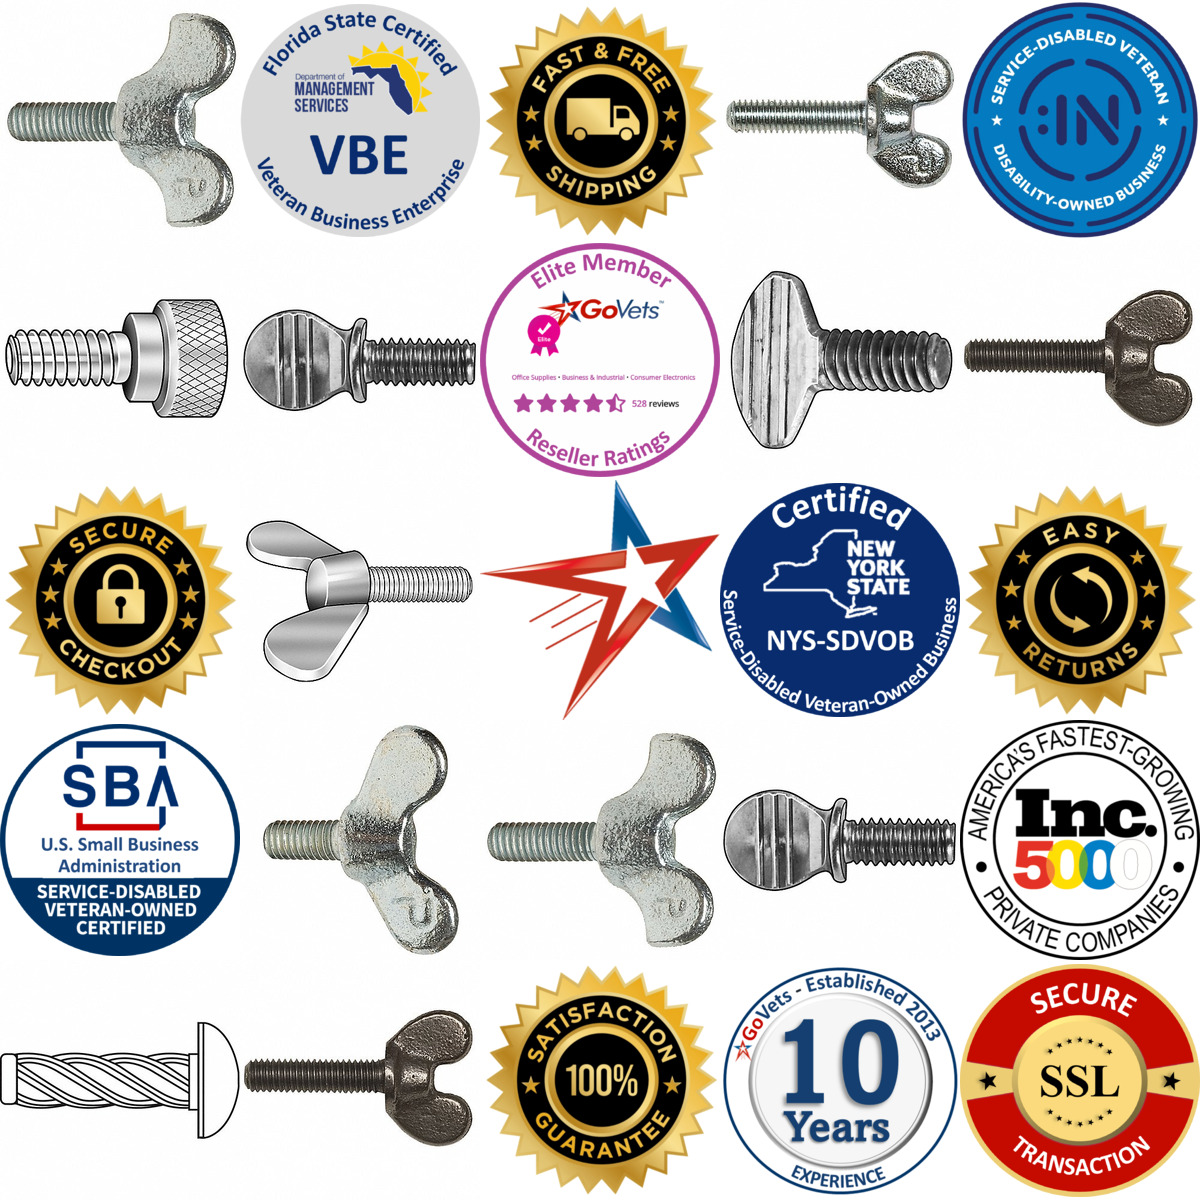 A selection of Thumb Screws products on GoVets